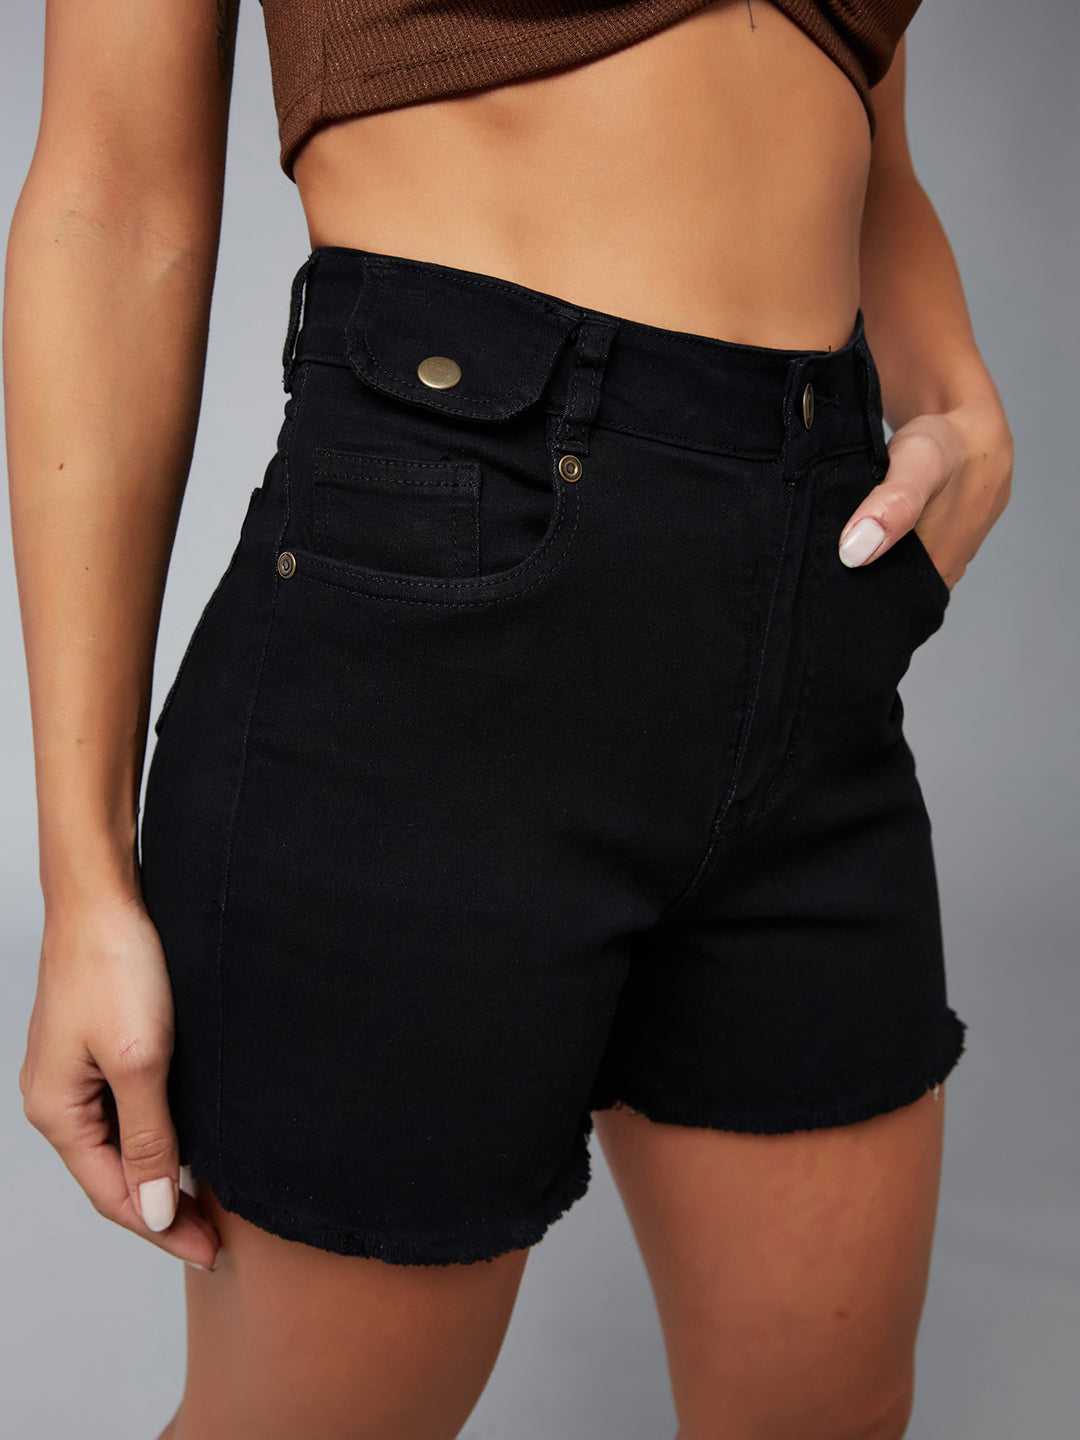 Women's Black Relaxed Fit High Rise Clean Look Regular Length Stretchable Denim Shorts